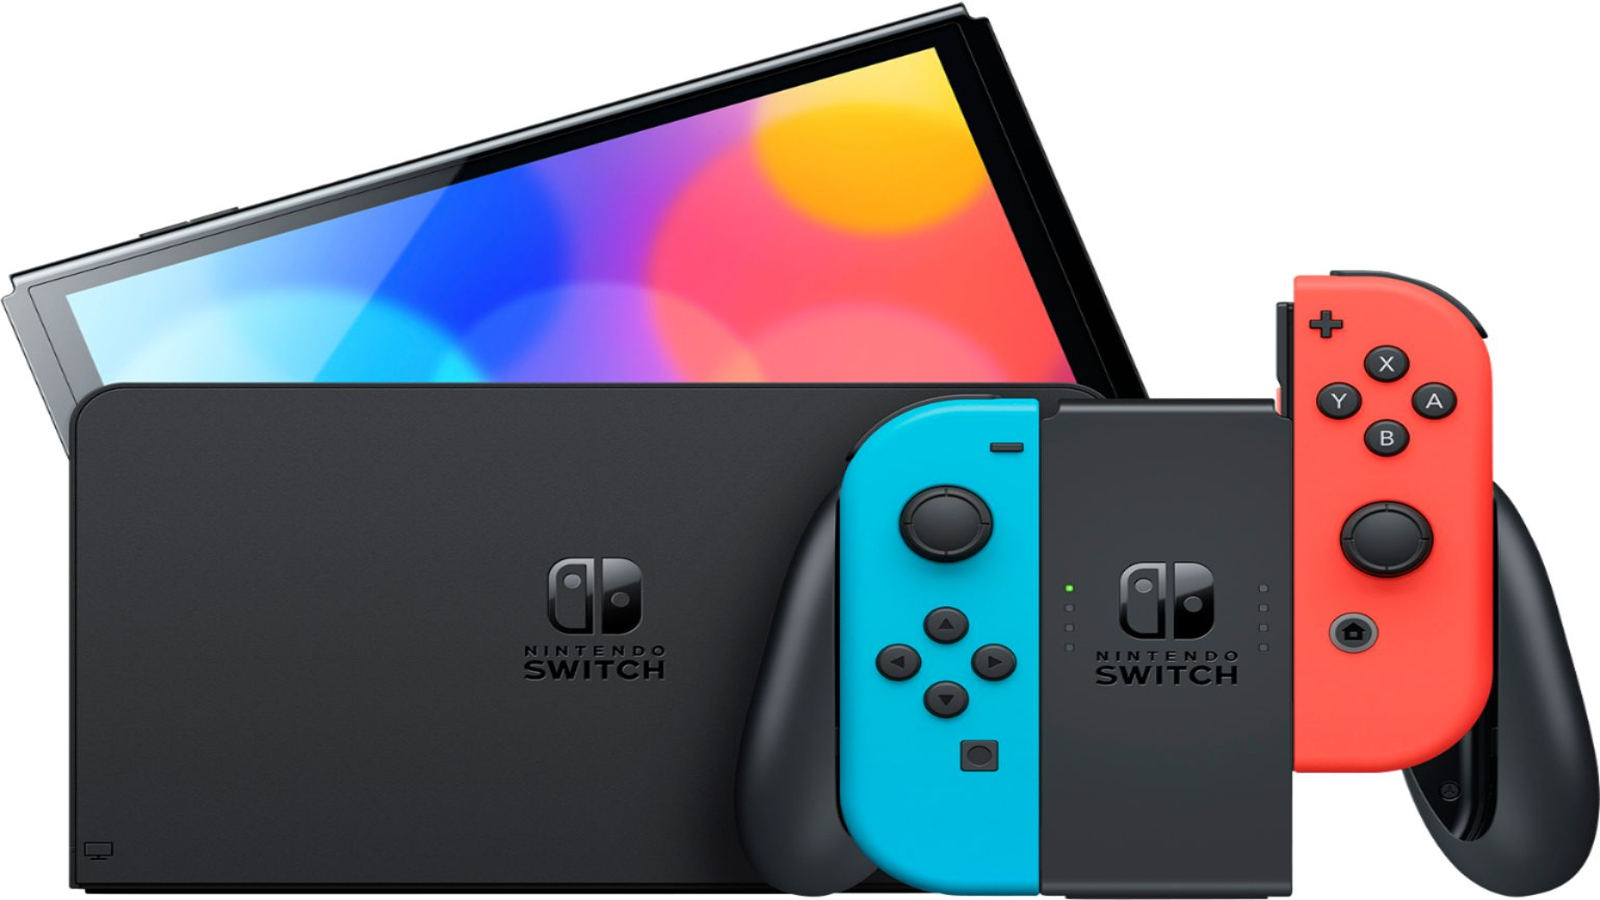 Nintendo Switch's Black Friday deal is the ideal Switch starter